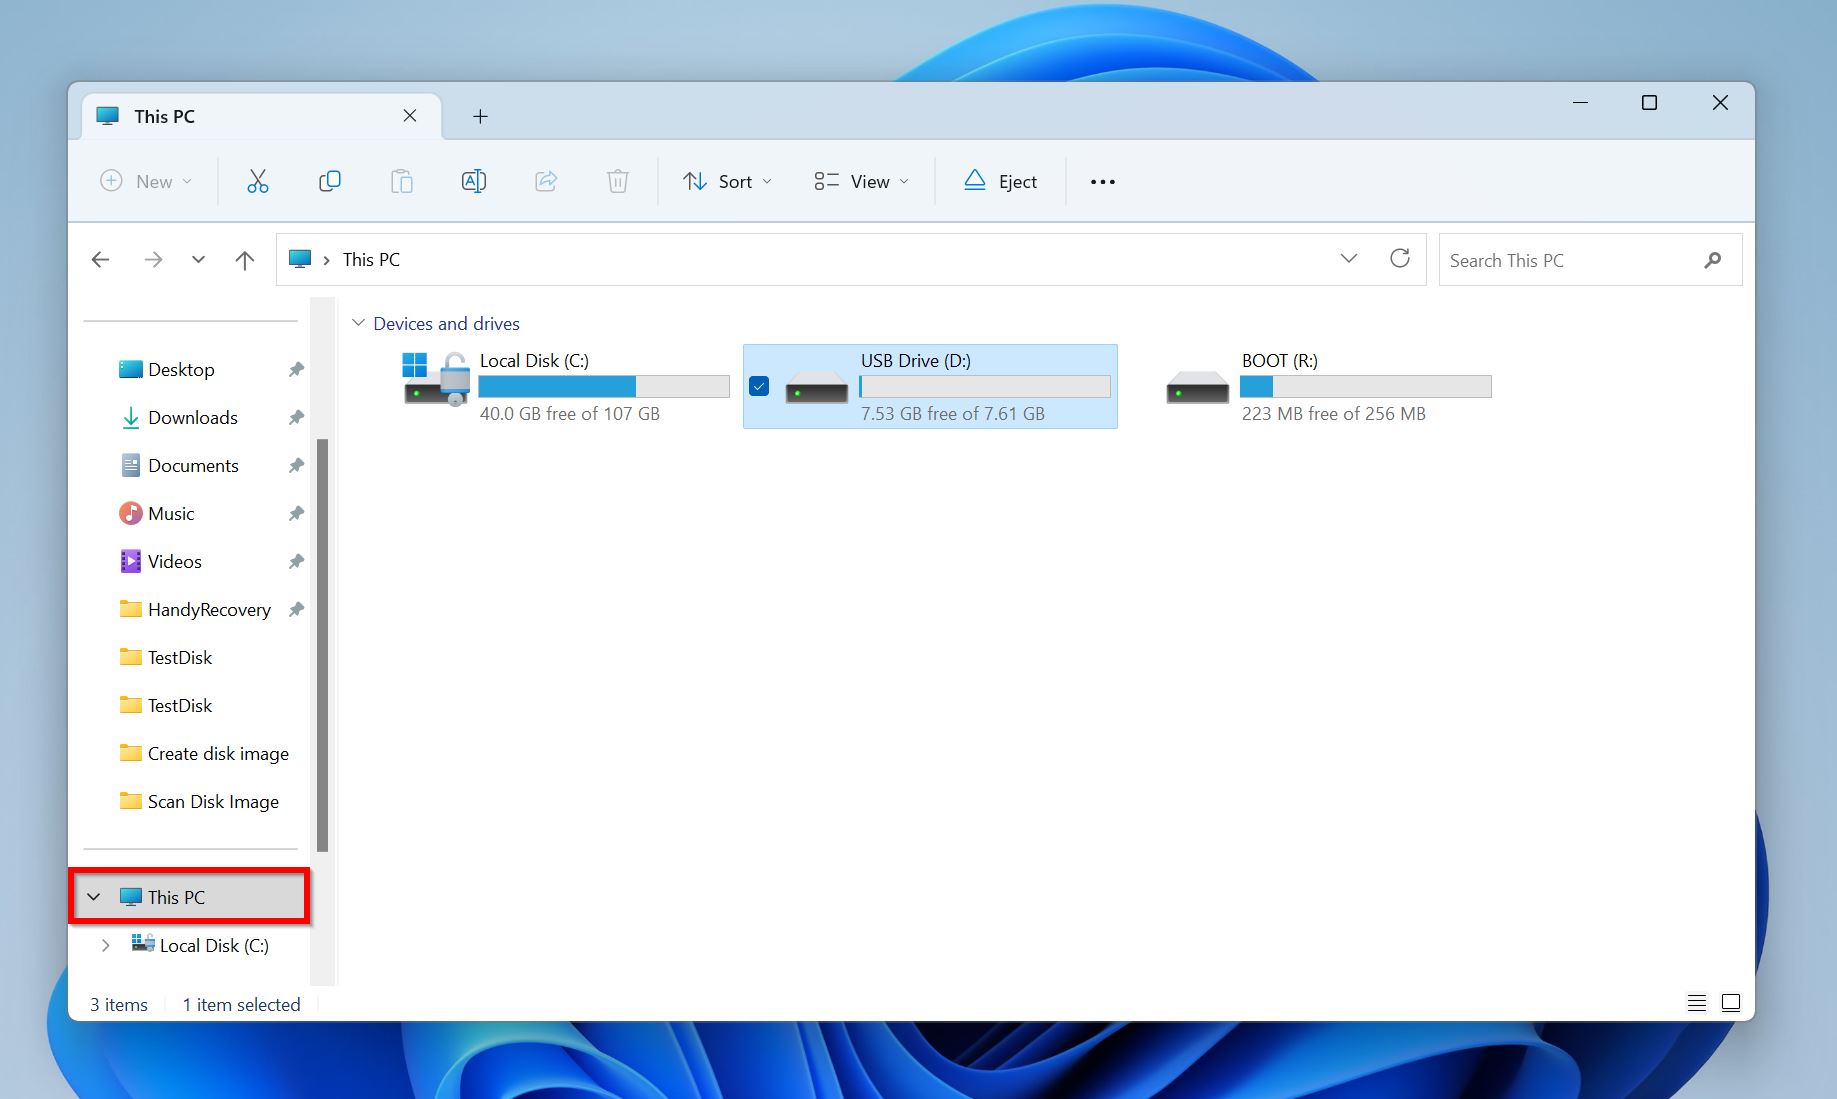 Windows File Explorer showing the Devices and Drives section, with USB Drive (D:) selected, indicating where the user can find the option to format the SD card.